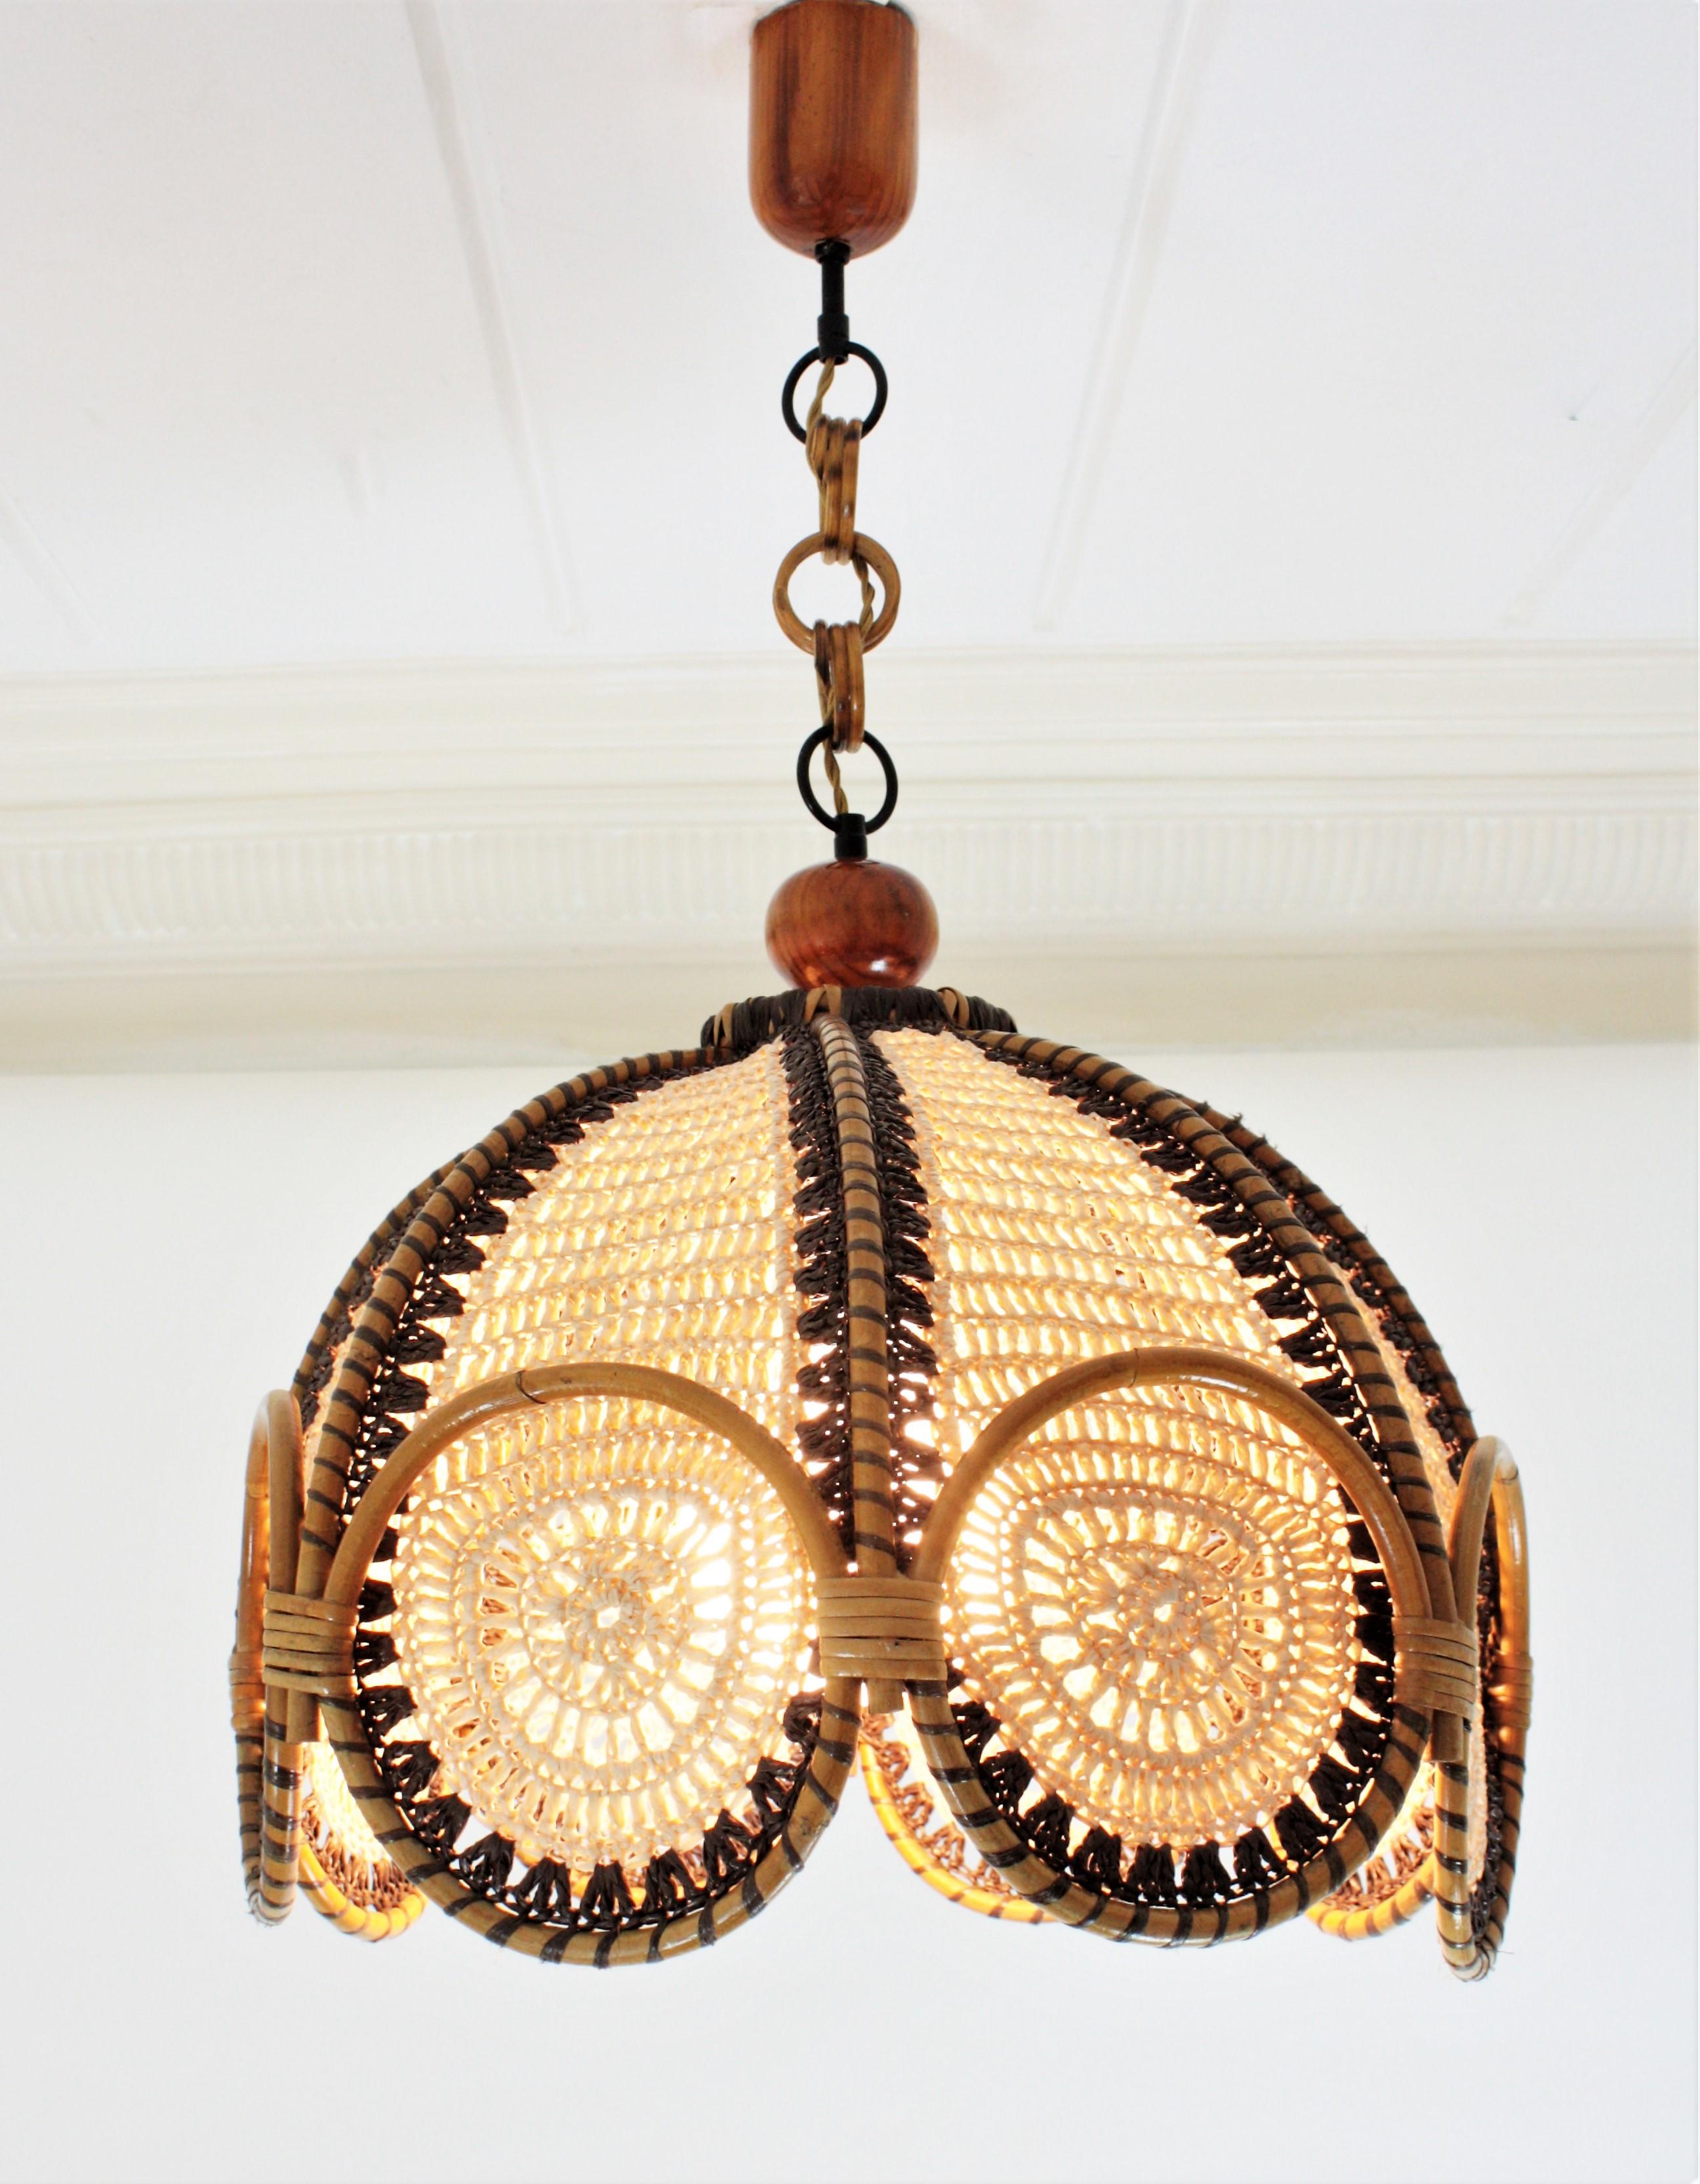 Spanish Modernist Beige and Brown Macramé Large Pendant Lamp with Rattan Rings 1